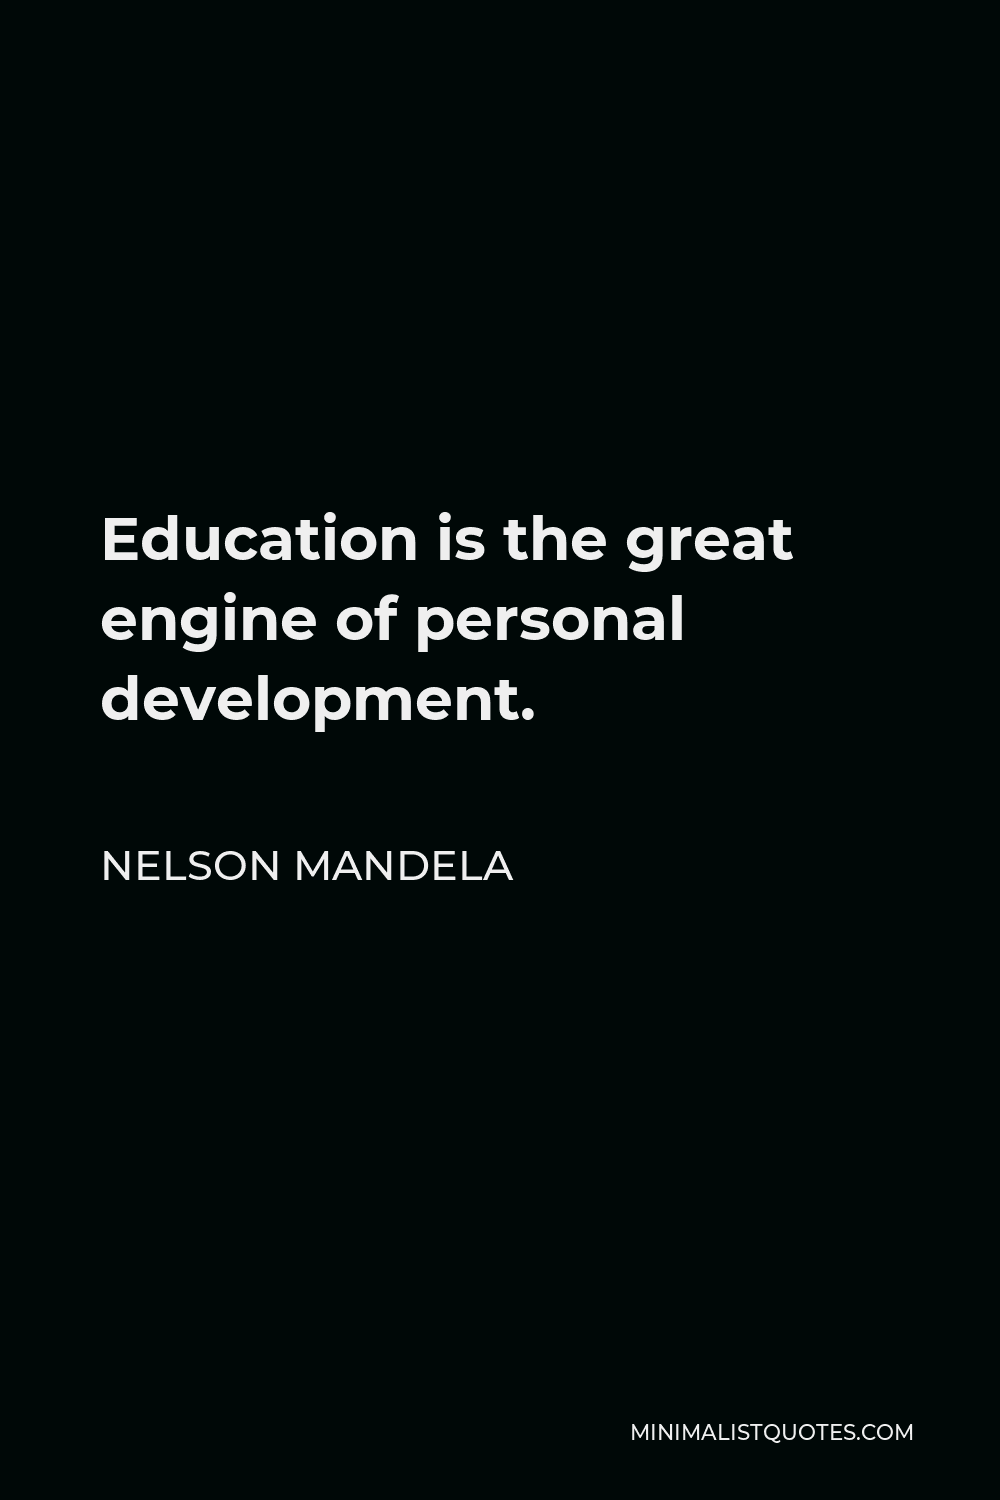 Nelson Mandela Quote - Education is the great engine of personal development.